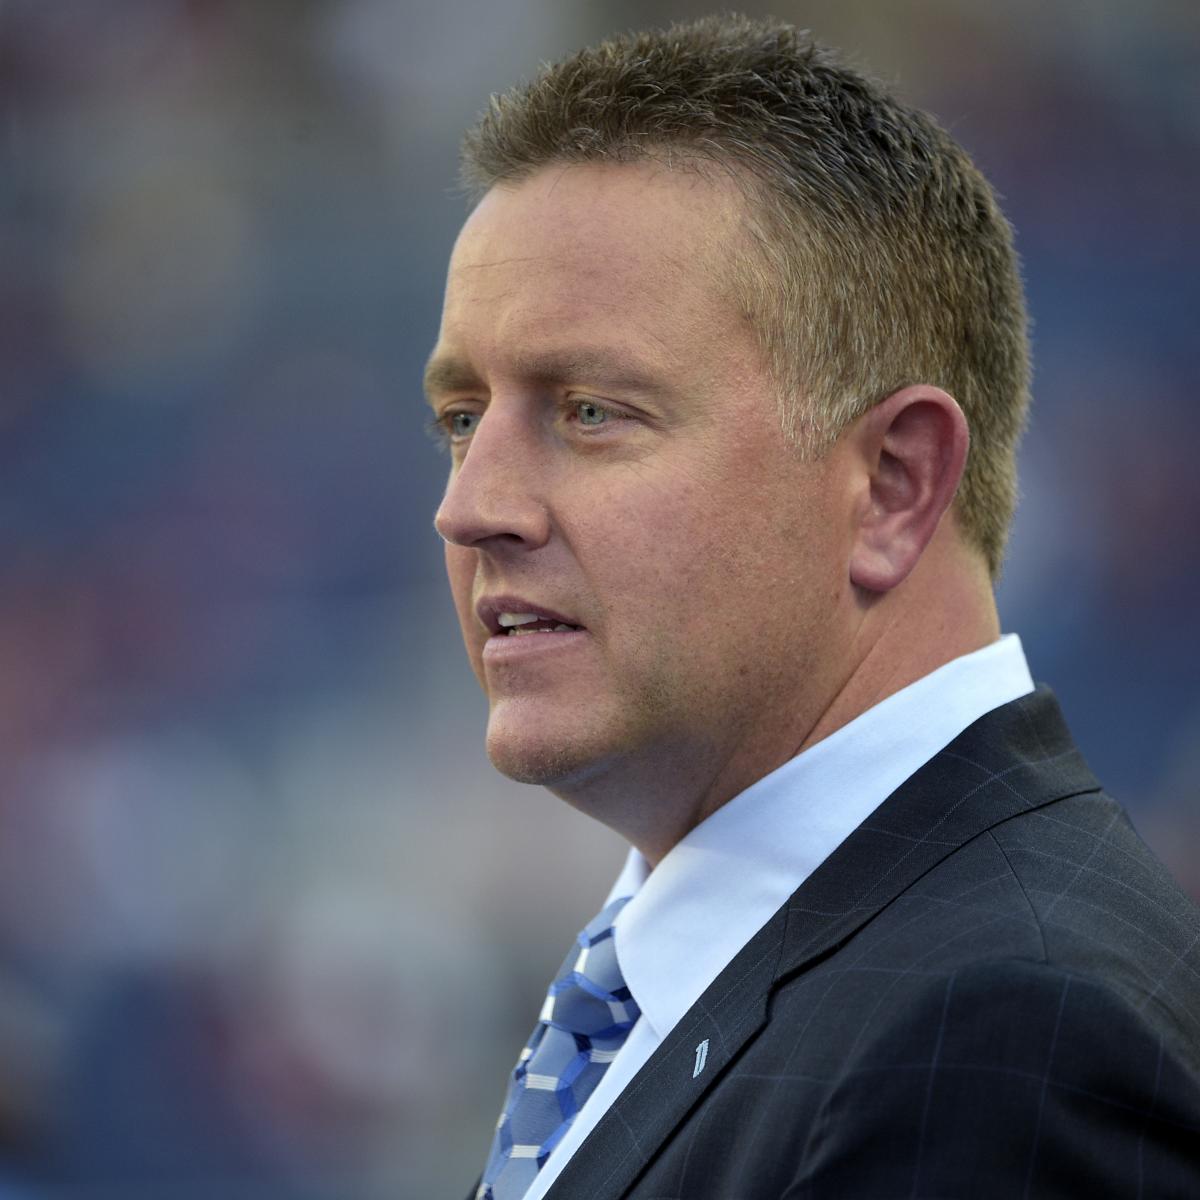 ESPN CFB Analyst Kirk Herbstreit Broadcasts COVID-19 Diagnosis